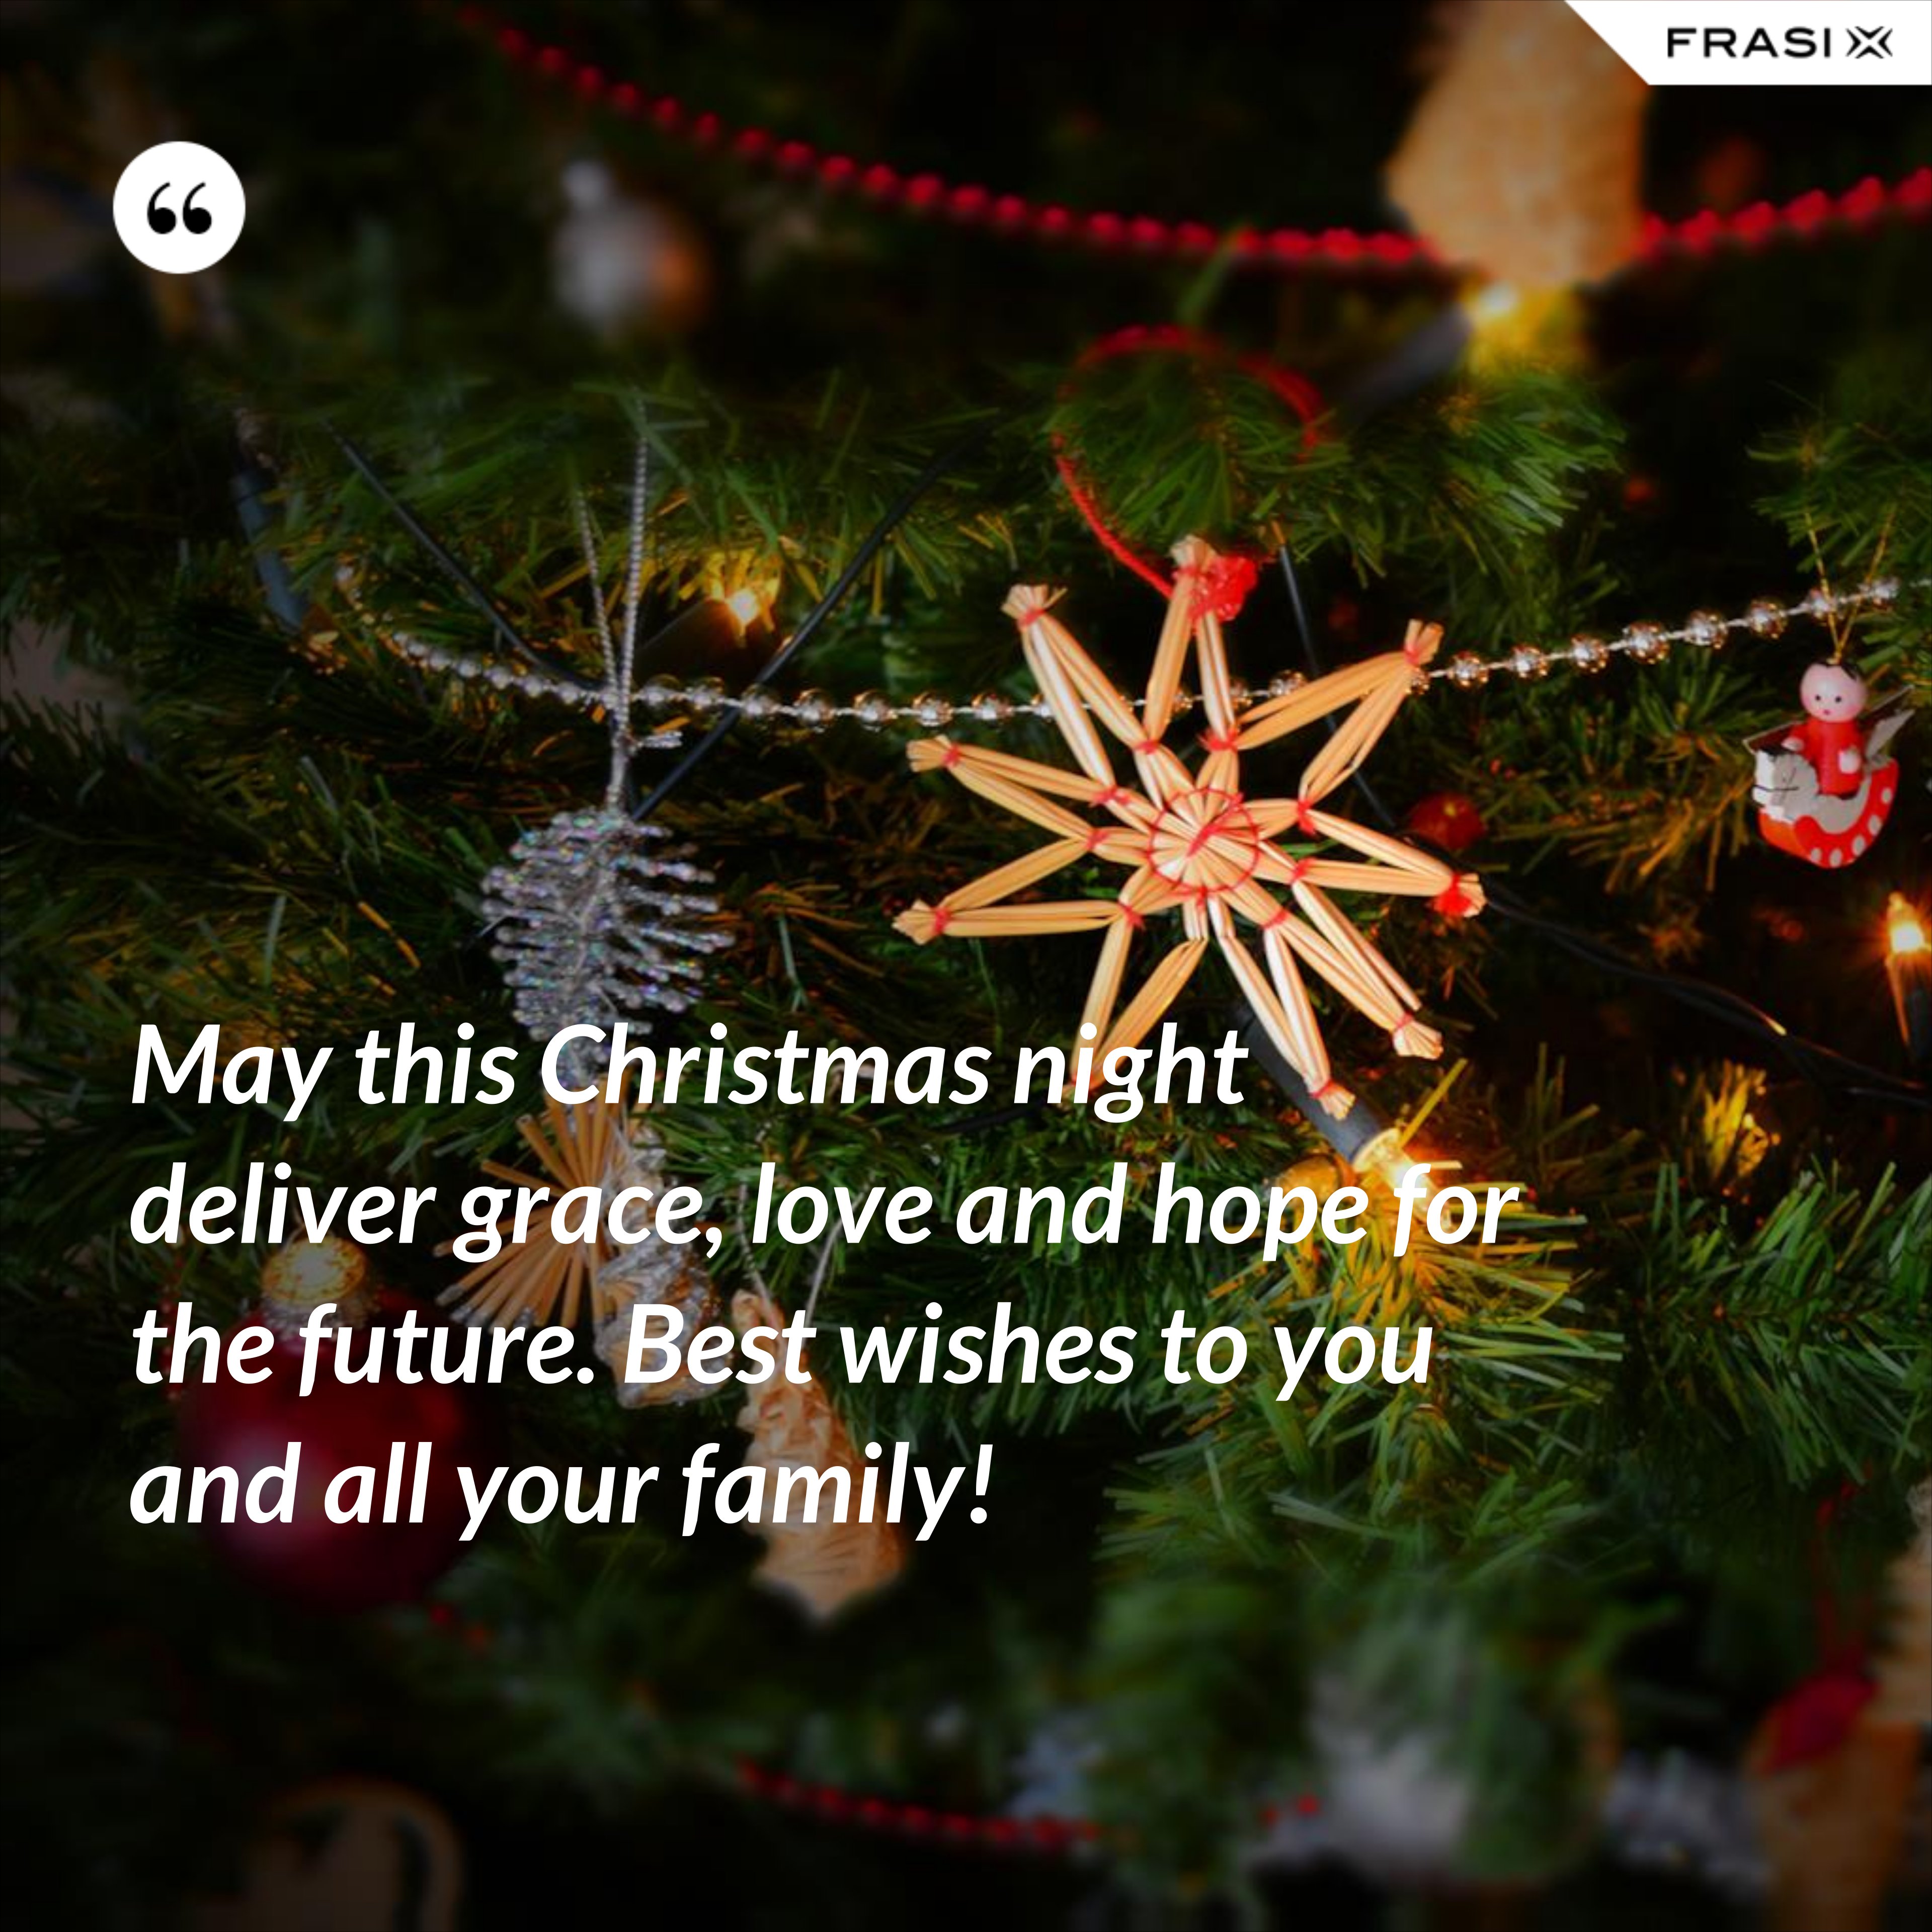 May this Christmas night deliver grace, love and hope for the future. Best wishes to you and all your family! - Anonimo